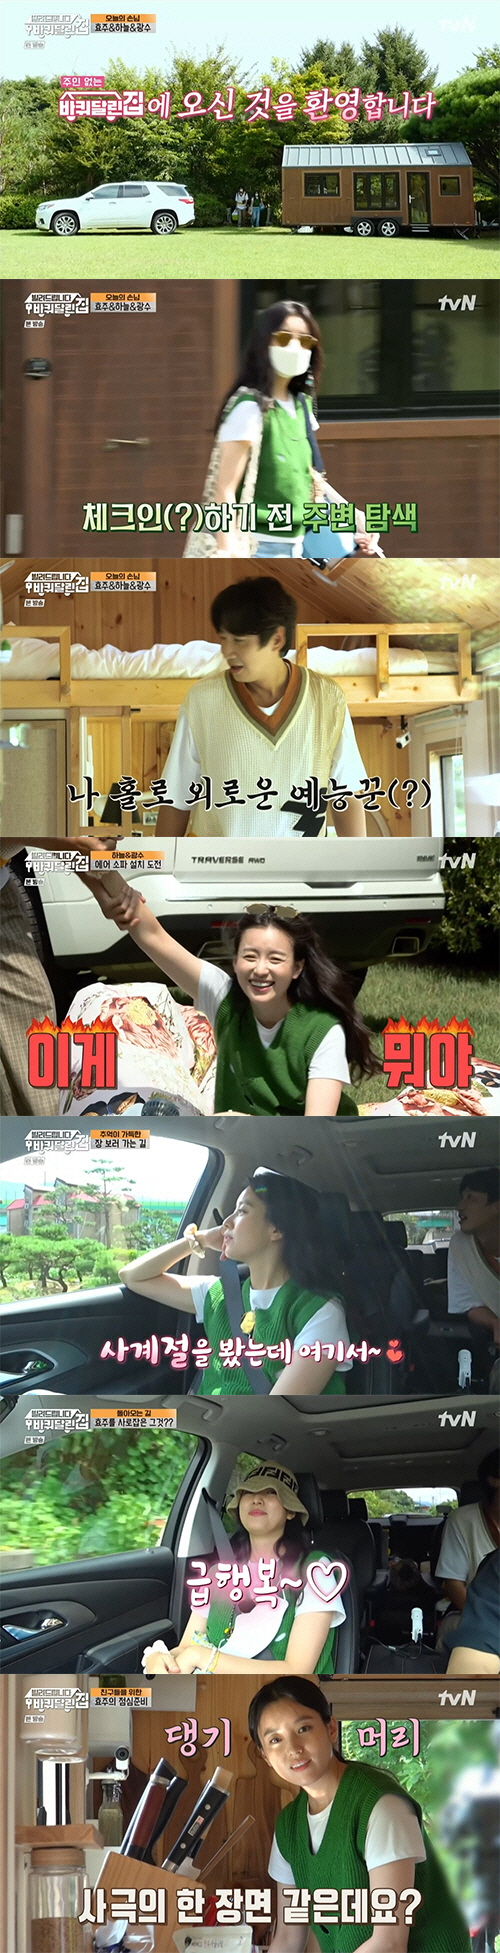 Pro entertainer Lee Kwang-soo has addressed the entertainment bottle.On the 13th, tvN wheeled house spin-off program borrowed house was first broadcast.Ill rent you a wheeled house is a concept program in which new cast members borrow the keys of the Badal house to the main cast members Sung Dong-il and Kim Hee One and live without a master, with the movie The Pirate Movie2: The Pirate Movie 2 (hereinafter referred to as The Pirate Movie 2). Han Hyo-Joo, Lee Kwang-soo, and Kang Ha-neul appeared in the first episode, while the two stars were expected to appear, including -soo, Kwon Sang-woo, Chae Soo-bin, Oh Se-hoon, Kim Sung-oh, Park Ji-hwan and Kim Ki-du.Han Hyo-joos huge amount of side dishes attracted attention, and Lee Kwang-soo, who saw it, was surprised that I think I can eat this for a month.Kang Ha-neul also said, We only have one night, but my sister is going to stay. Han Hyo-joo laughed, I will try it if I like it.As soon as Lee Kwang-soo unpacked, he could not stand still for a moment and began to move briskly, and if the conversation was interrupted for a moment, he tried to do anything, saying, Lets see whats around.One has to do this, urged Kang Ha-neul as he burst into laughter.Lets just have a little five minutes, Han Hyo-joo said as Lee Kwang-soo kept urging him to go outside.My brother is a bit of a (entertainment) disease, Kang Ha-neul said, directed at Lee Kwang-soo, who continues to be restless.When Han Hyo-joo put the words Stay still, Lee Kwang-soo said, I did it for 11 years.I am just lying at home if this happens. He laughed at the Running Man 11-year fixed cast member Chambap .After visiting the mart, Han Hyo-joo prepared a meal and Kang Ha-neul and Lee Kwang-soo stepped out to play the tarp.I called Sung Dong-il and explained how to tap, but it was not easy.Park Ji-hwan and Kim Sung-oh arrived at the wheeled house while the two were wrestling with the tap.In particular, Kim Sung-oh changed his coffee directly for the members as soon as he arrived.In particular, Park Ji-hwan said, The best thing is to Hyoju.Han Hyo-joo has been making curry and bean noodles for members and everyone has taken pictures with admiration for the delicious-looking visuals; after the meal, the members headed to Valley.Valley had arrived with Kwon Sang-woo, Oh Se-hoon, Chae Soo-bin and Kim Gi-du; finally members who became fully-formed.There is interest in what story will be unfolded from next weeks broadcast.